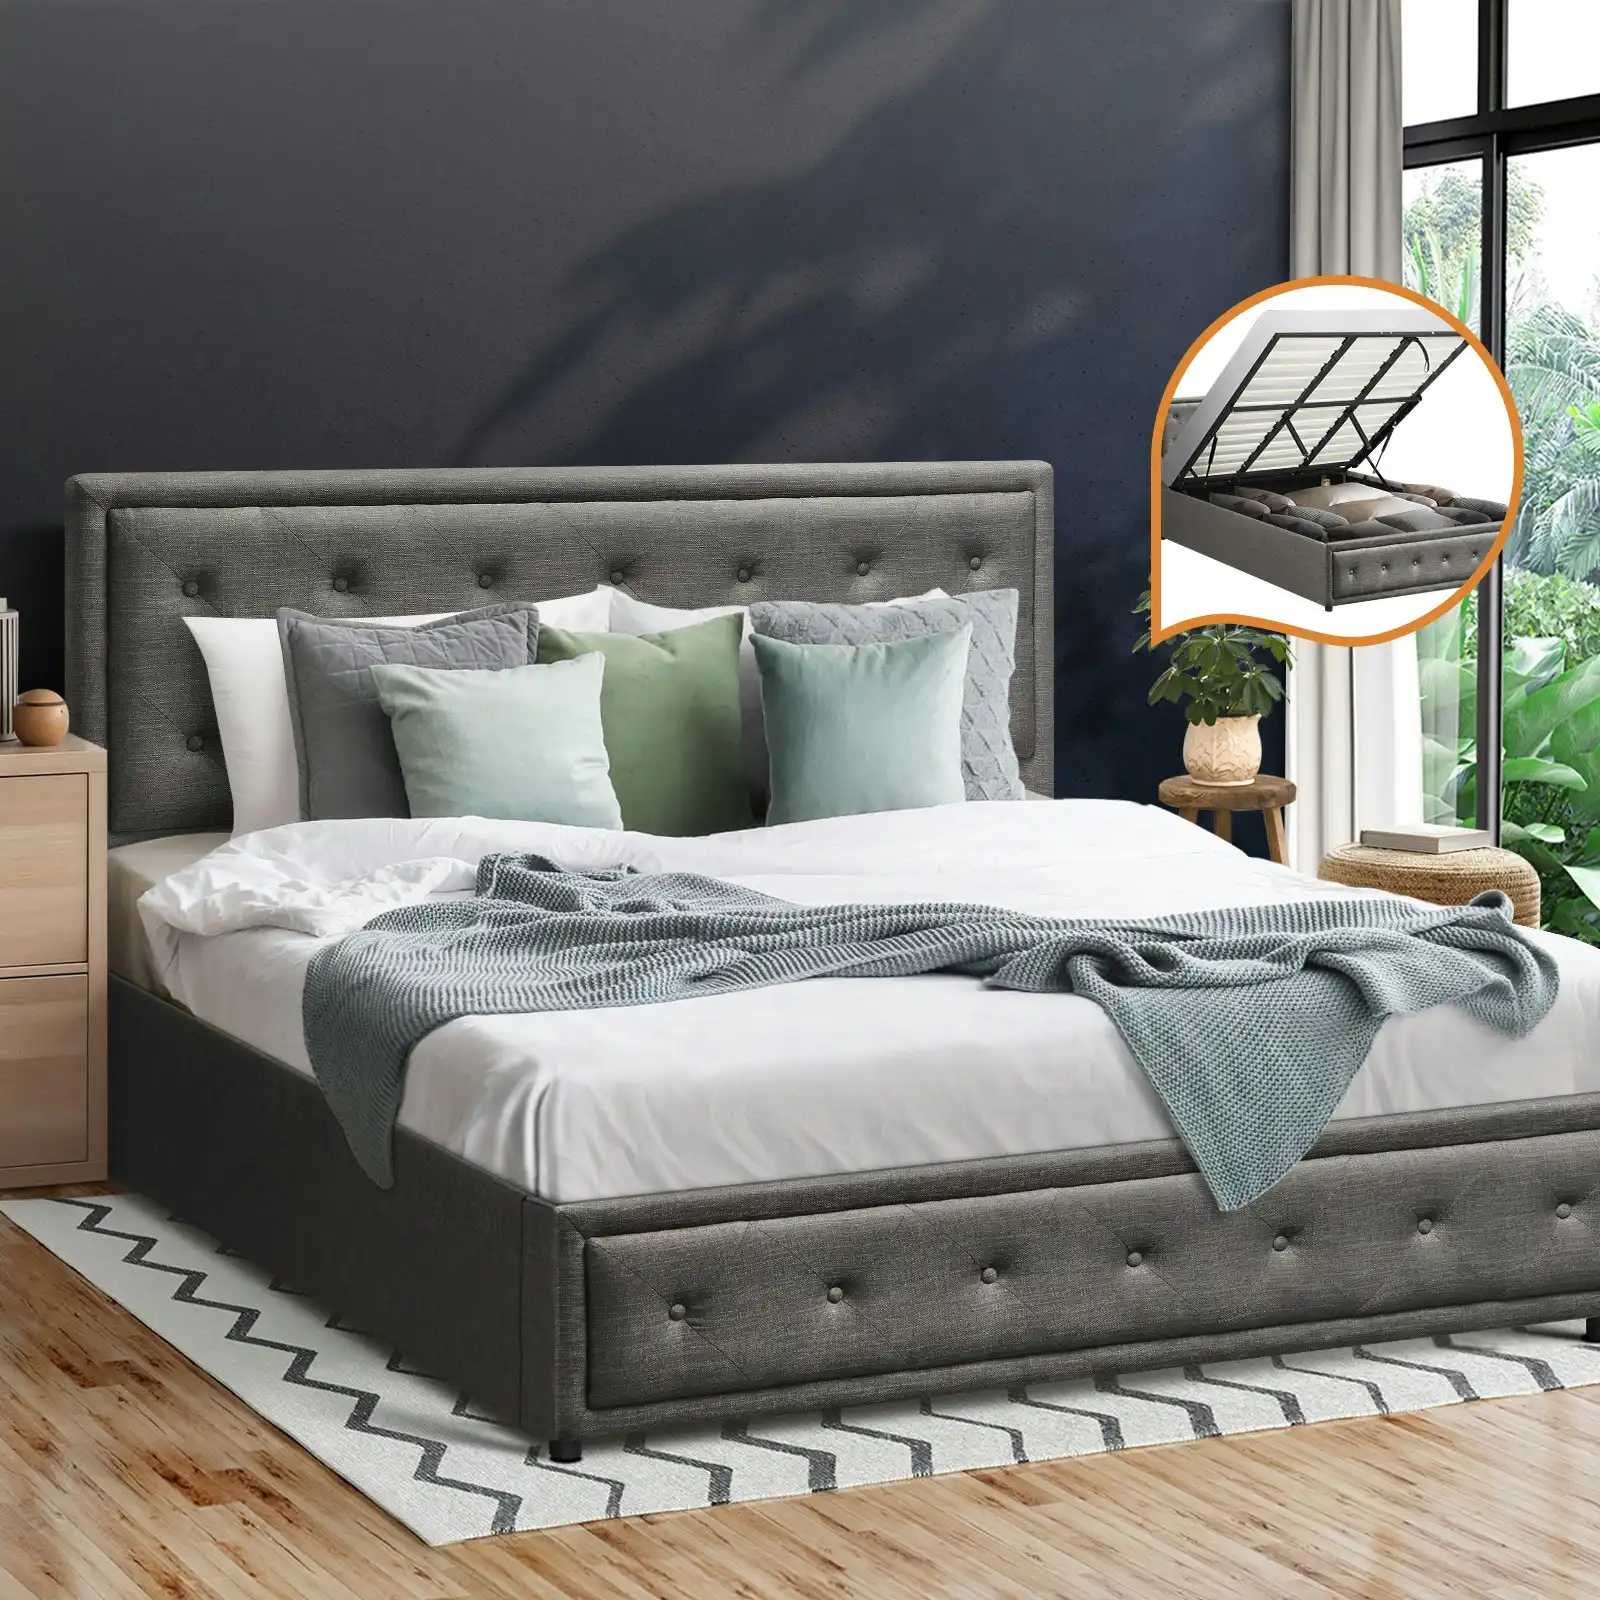 Oikiture Bed Frame King Size Gas Lift Base With Storage Grey Fabric